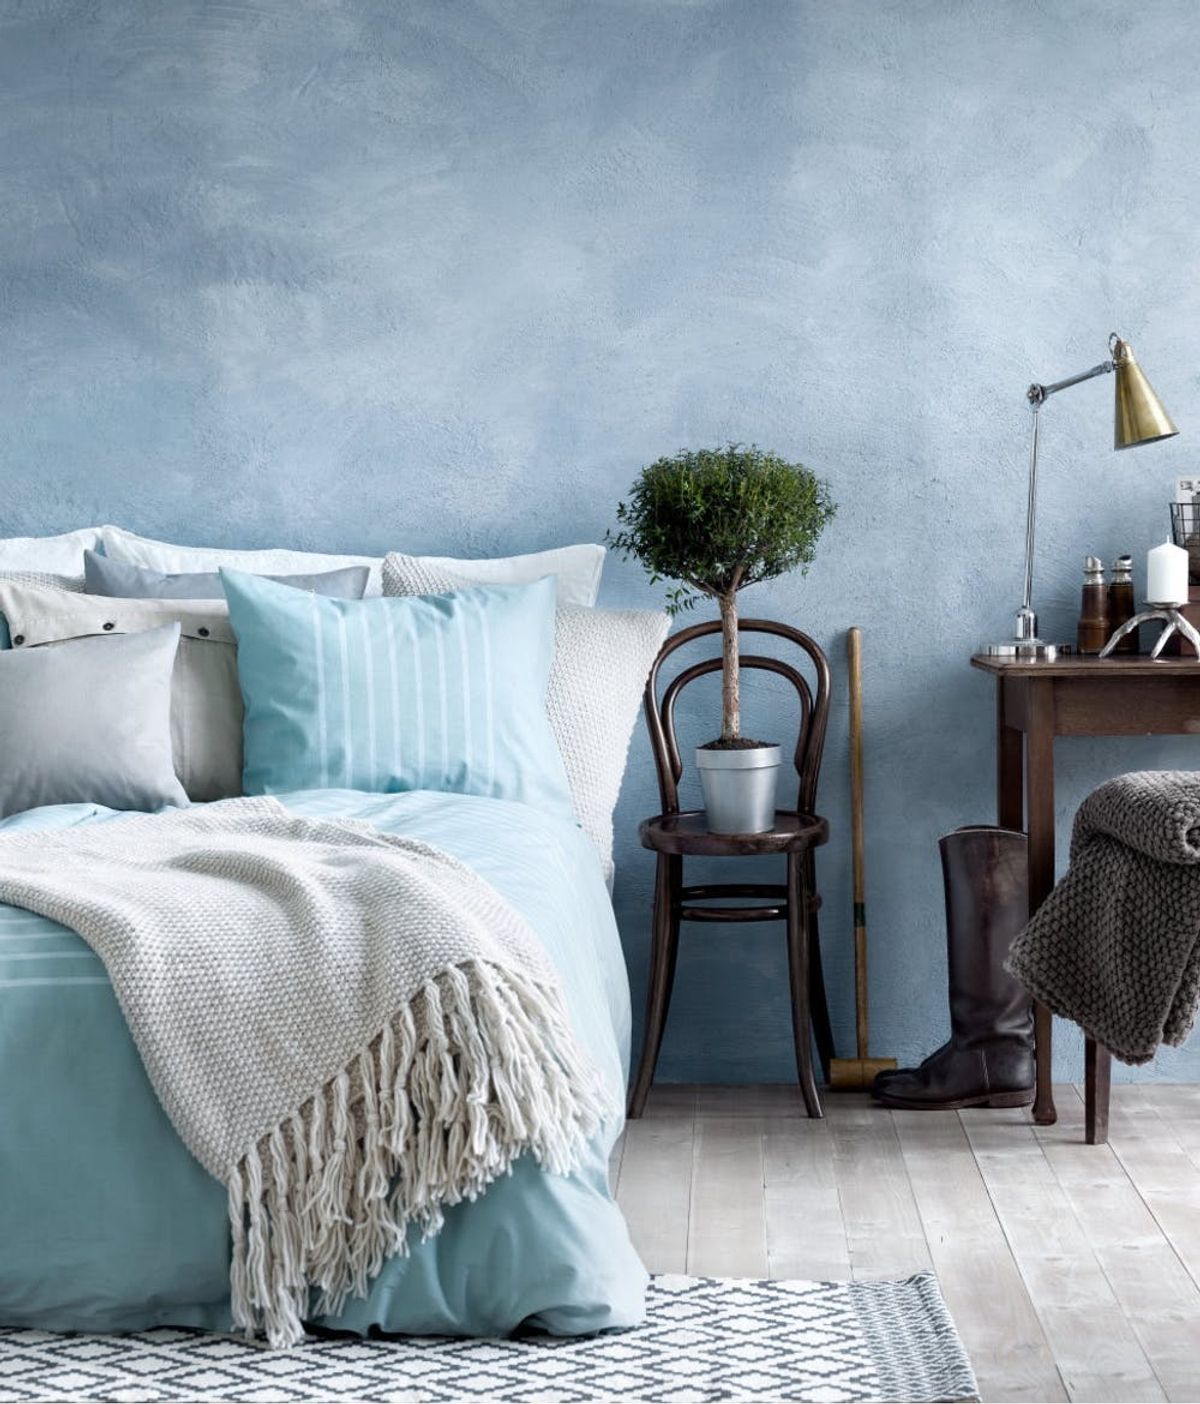 16 Ways to Decorate Your Bedroom on Budget